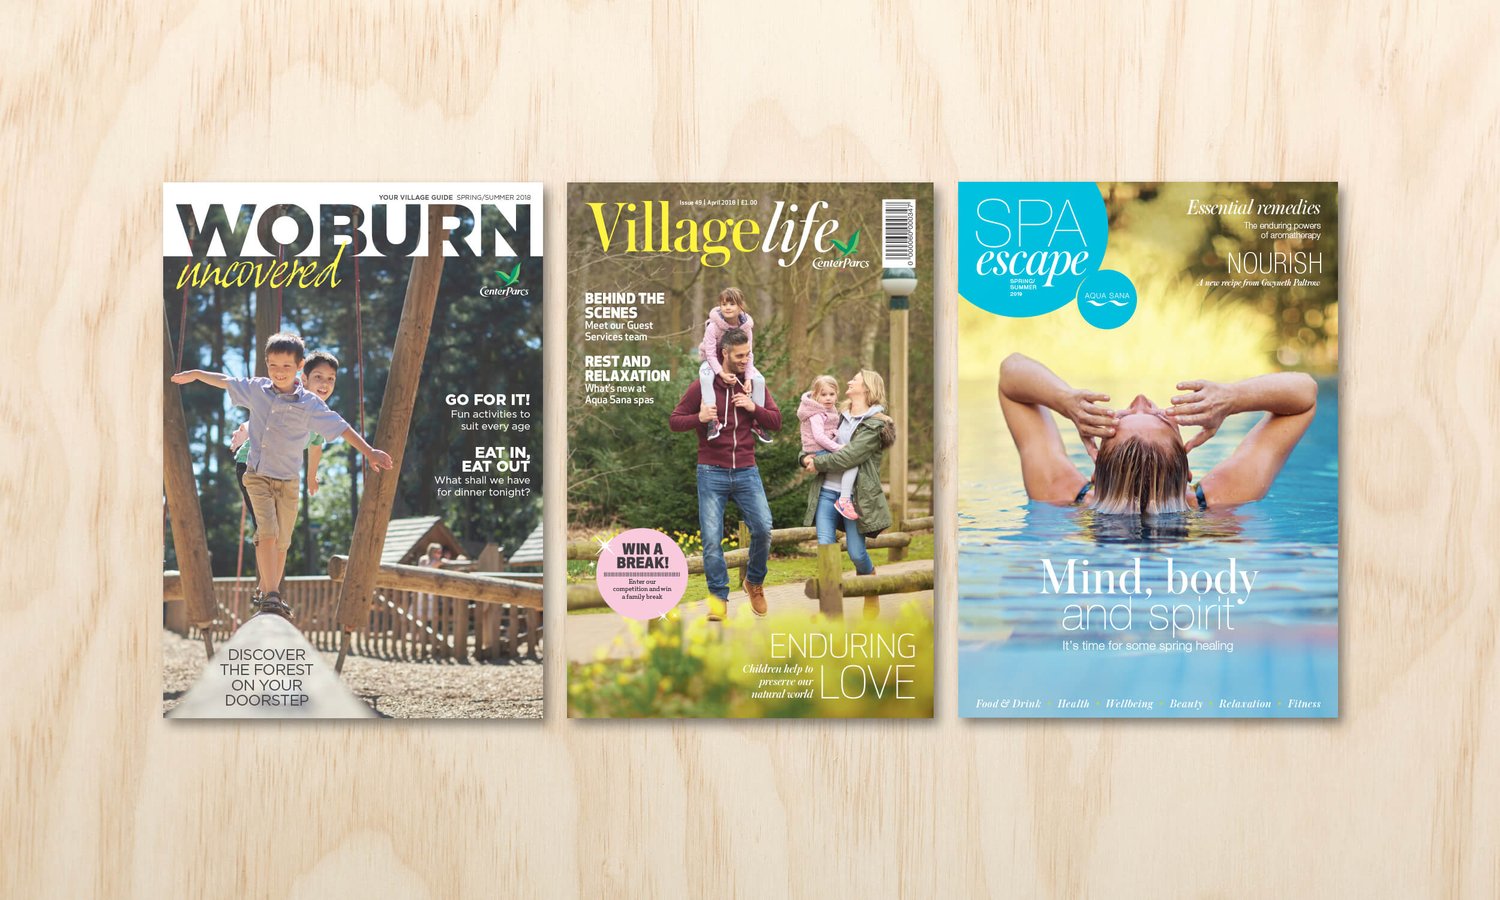 Threw magazine covers for Center Parcs produced by Dialogue